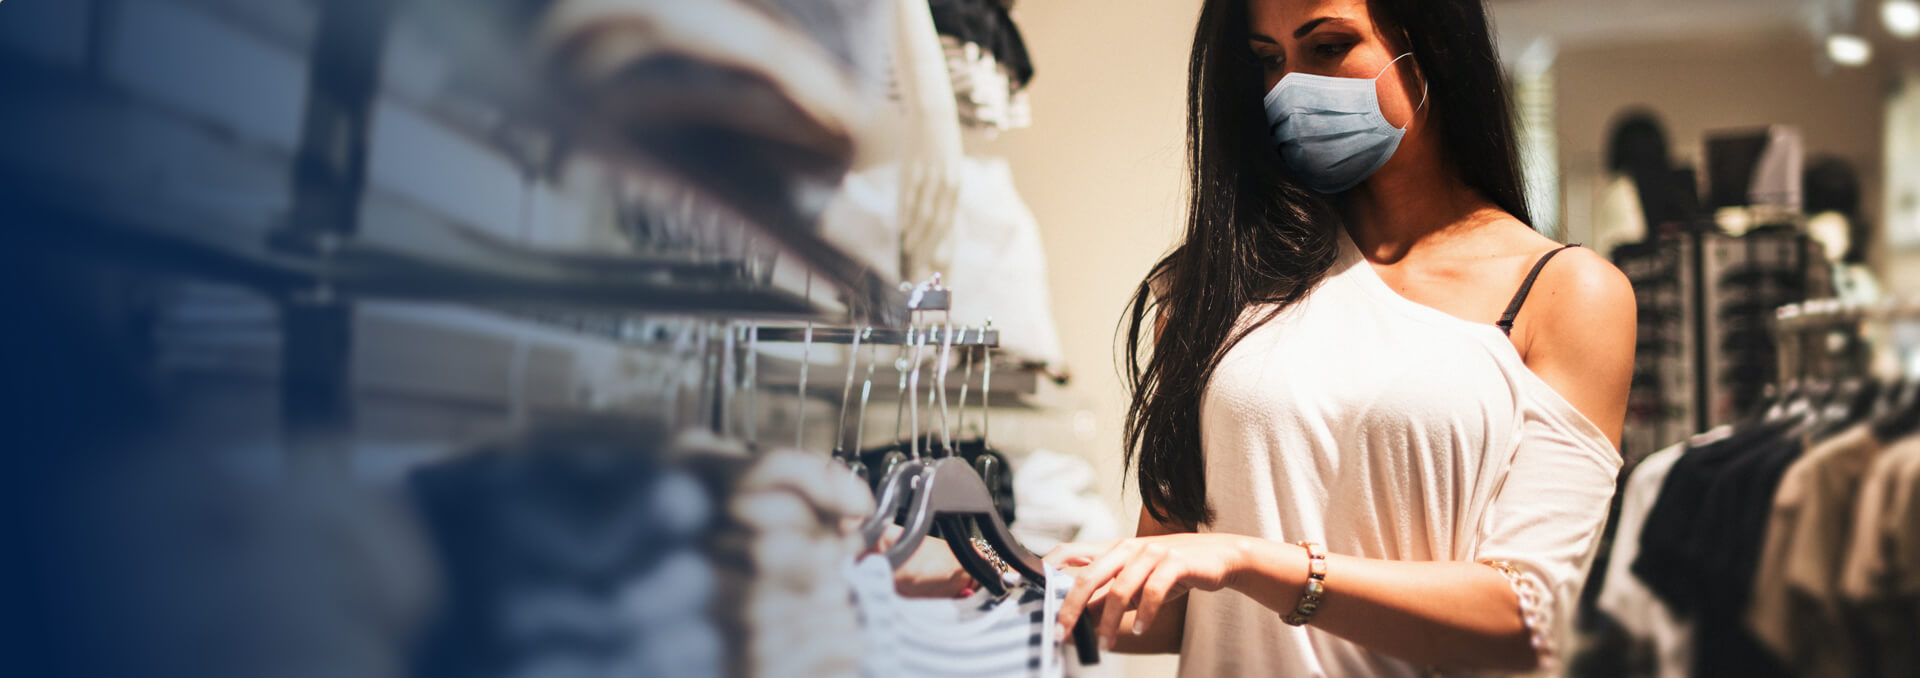 woman in a clothing store wearing a face mask